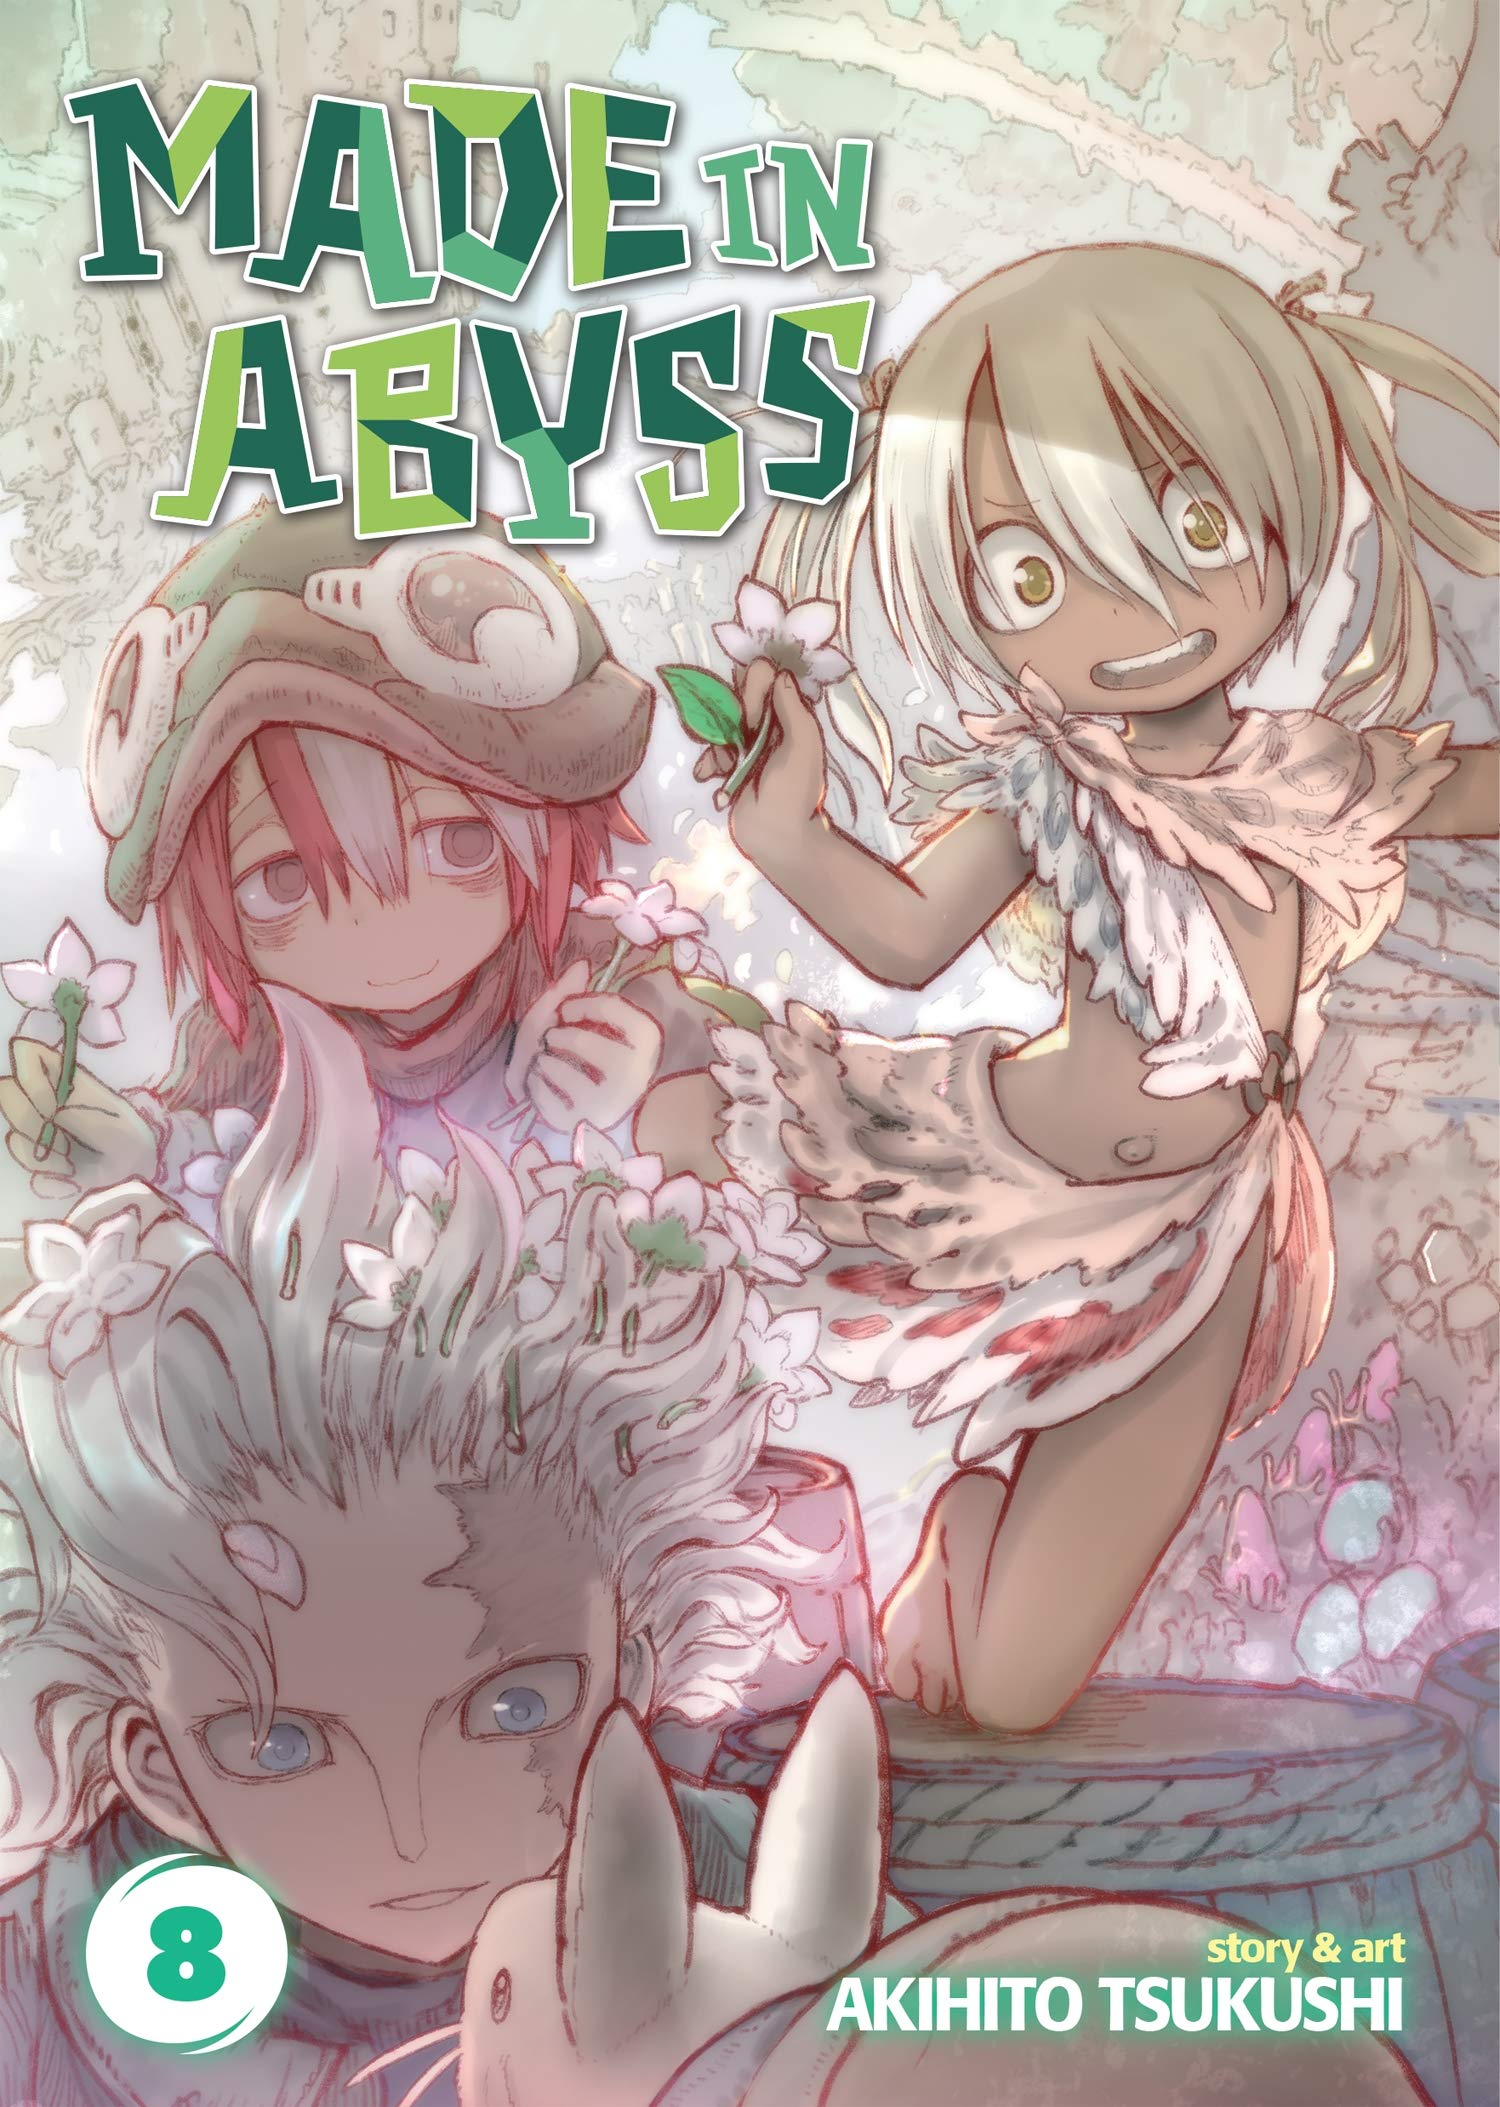 Made in Abyss Chapter 056, Made in Abyss Wiki